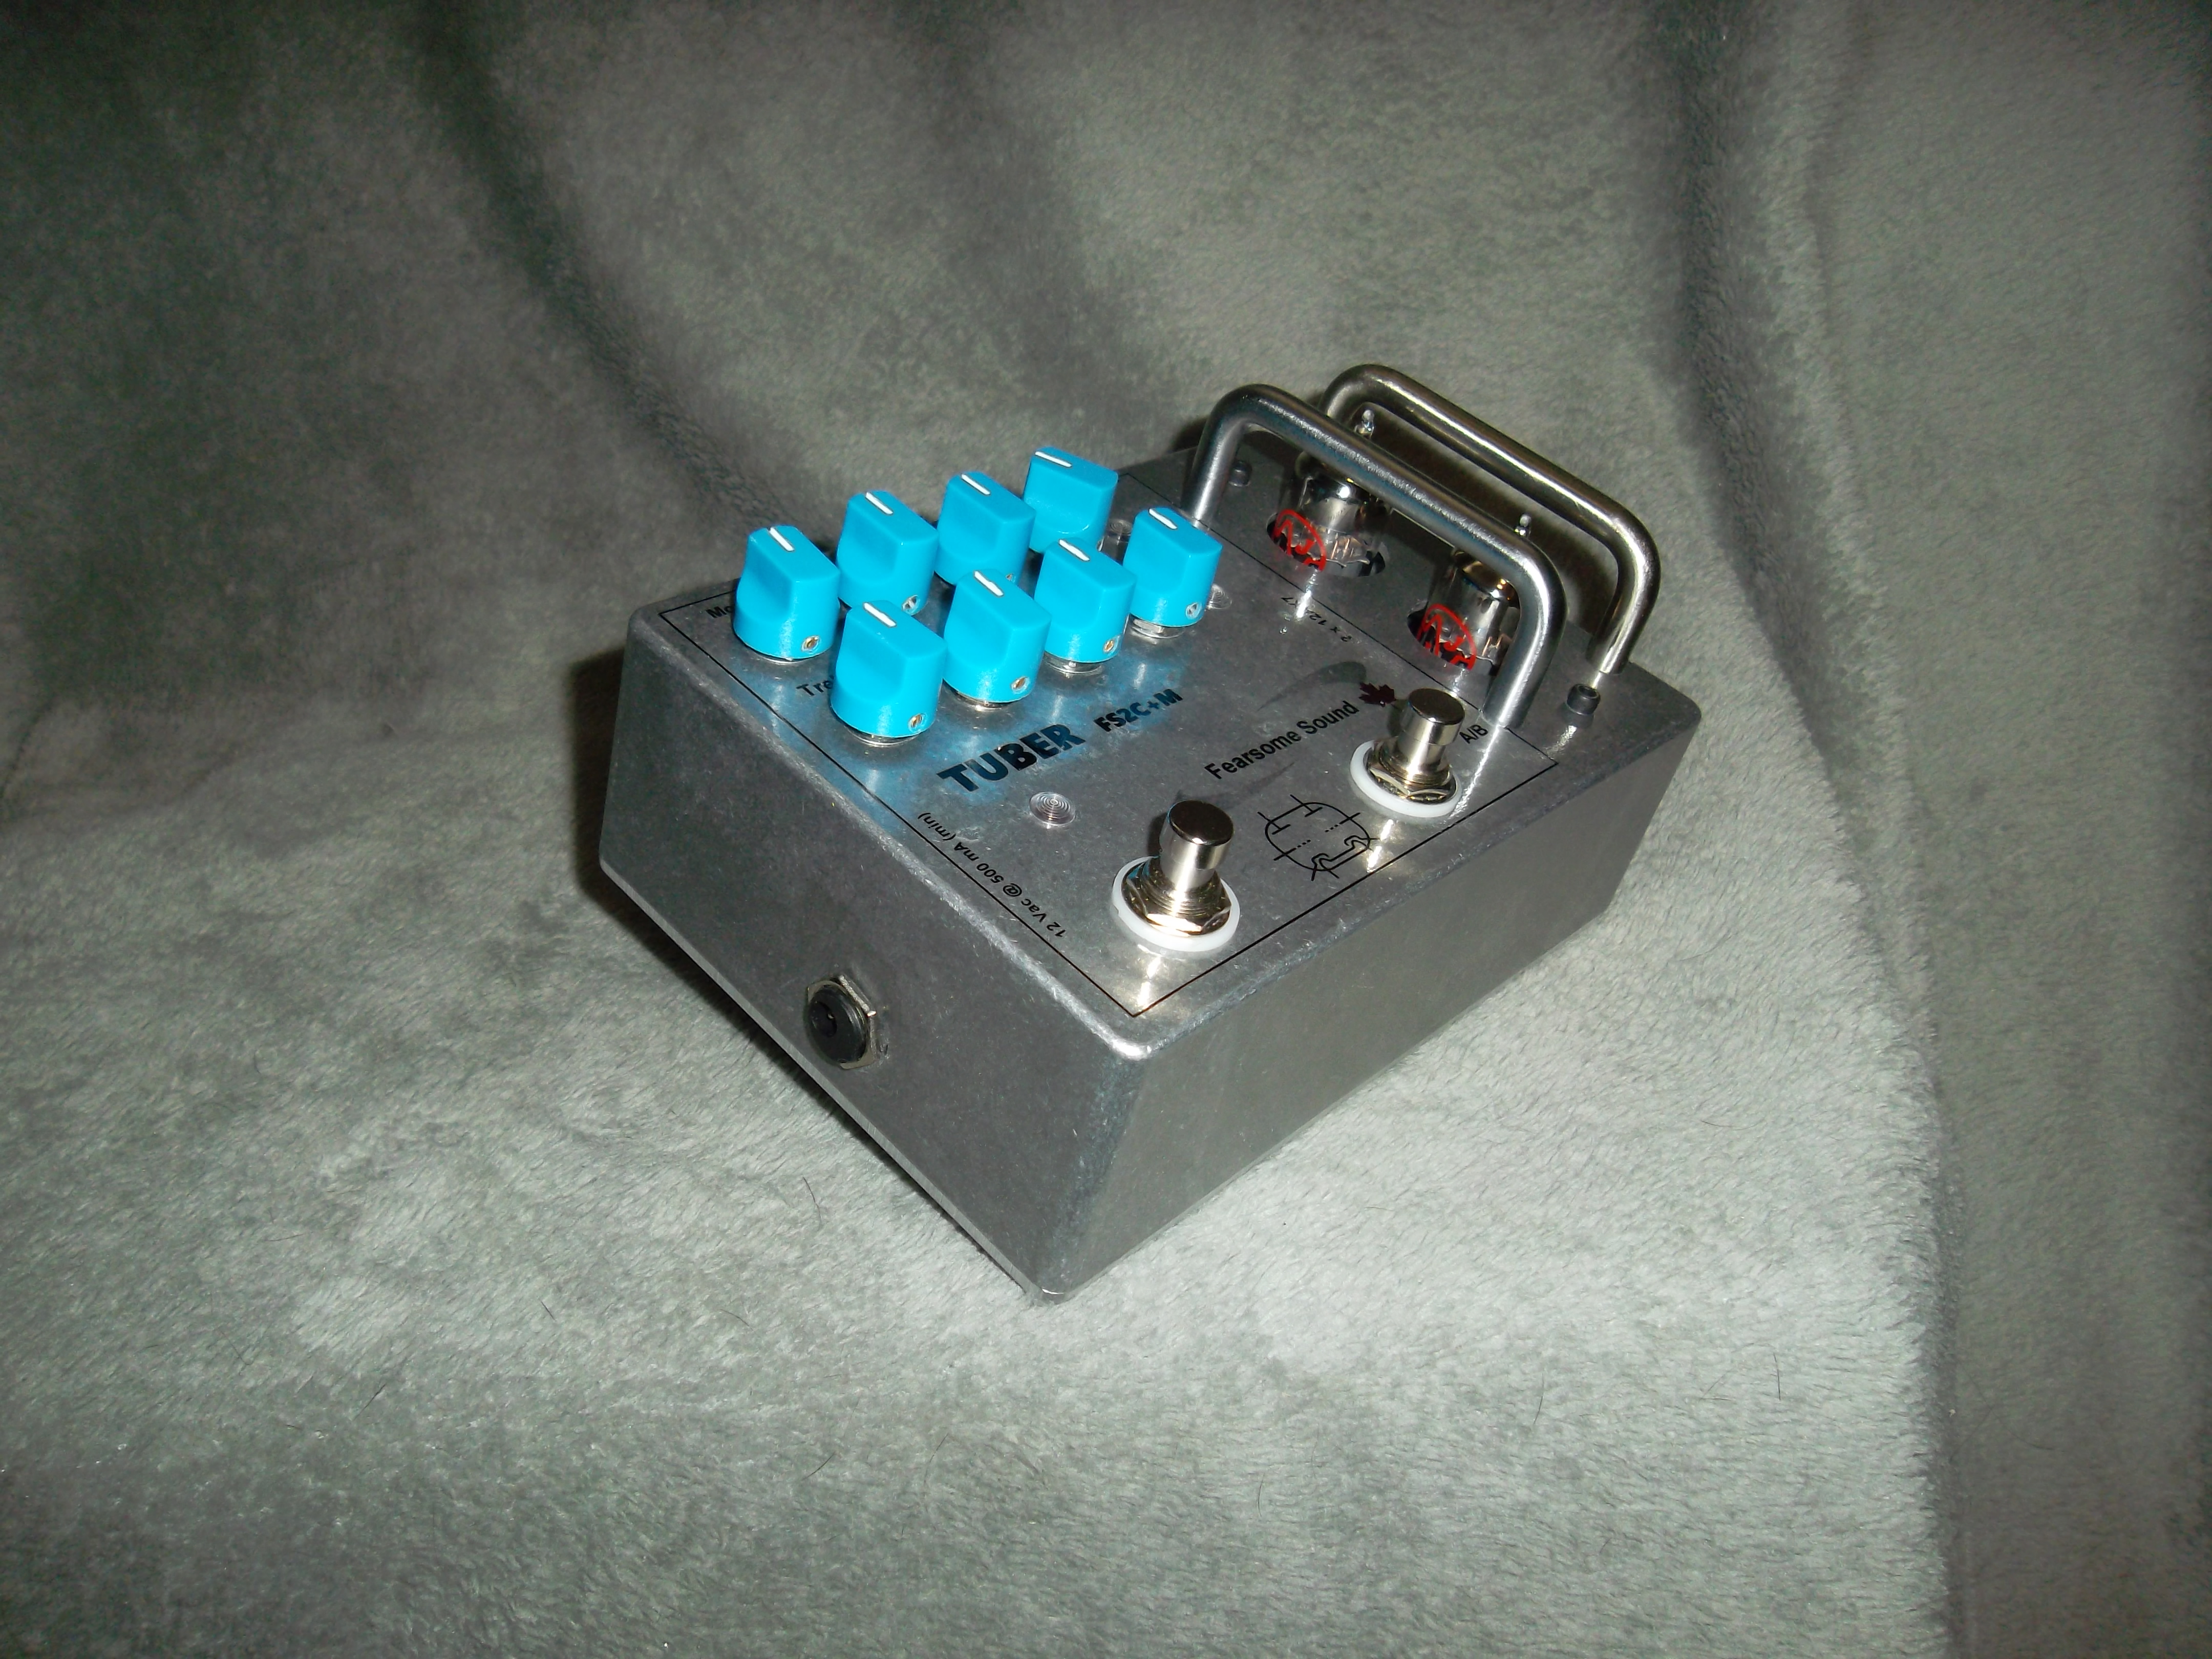 TUBER FS2C+M side panel showing the ac power input jack